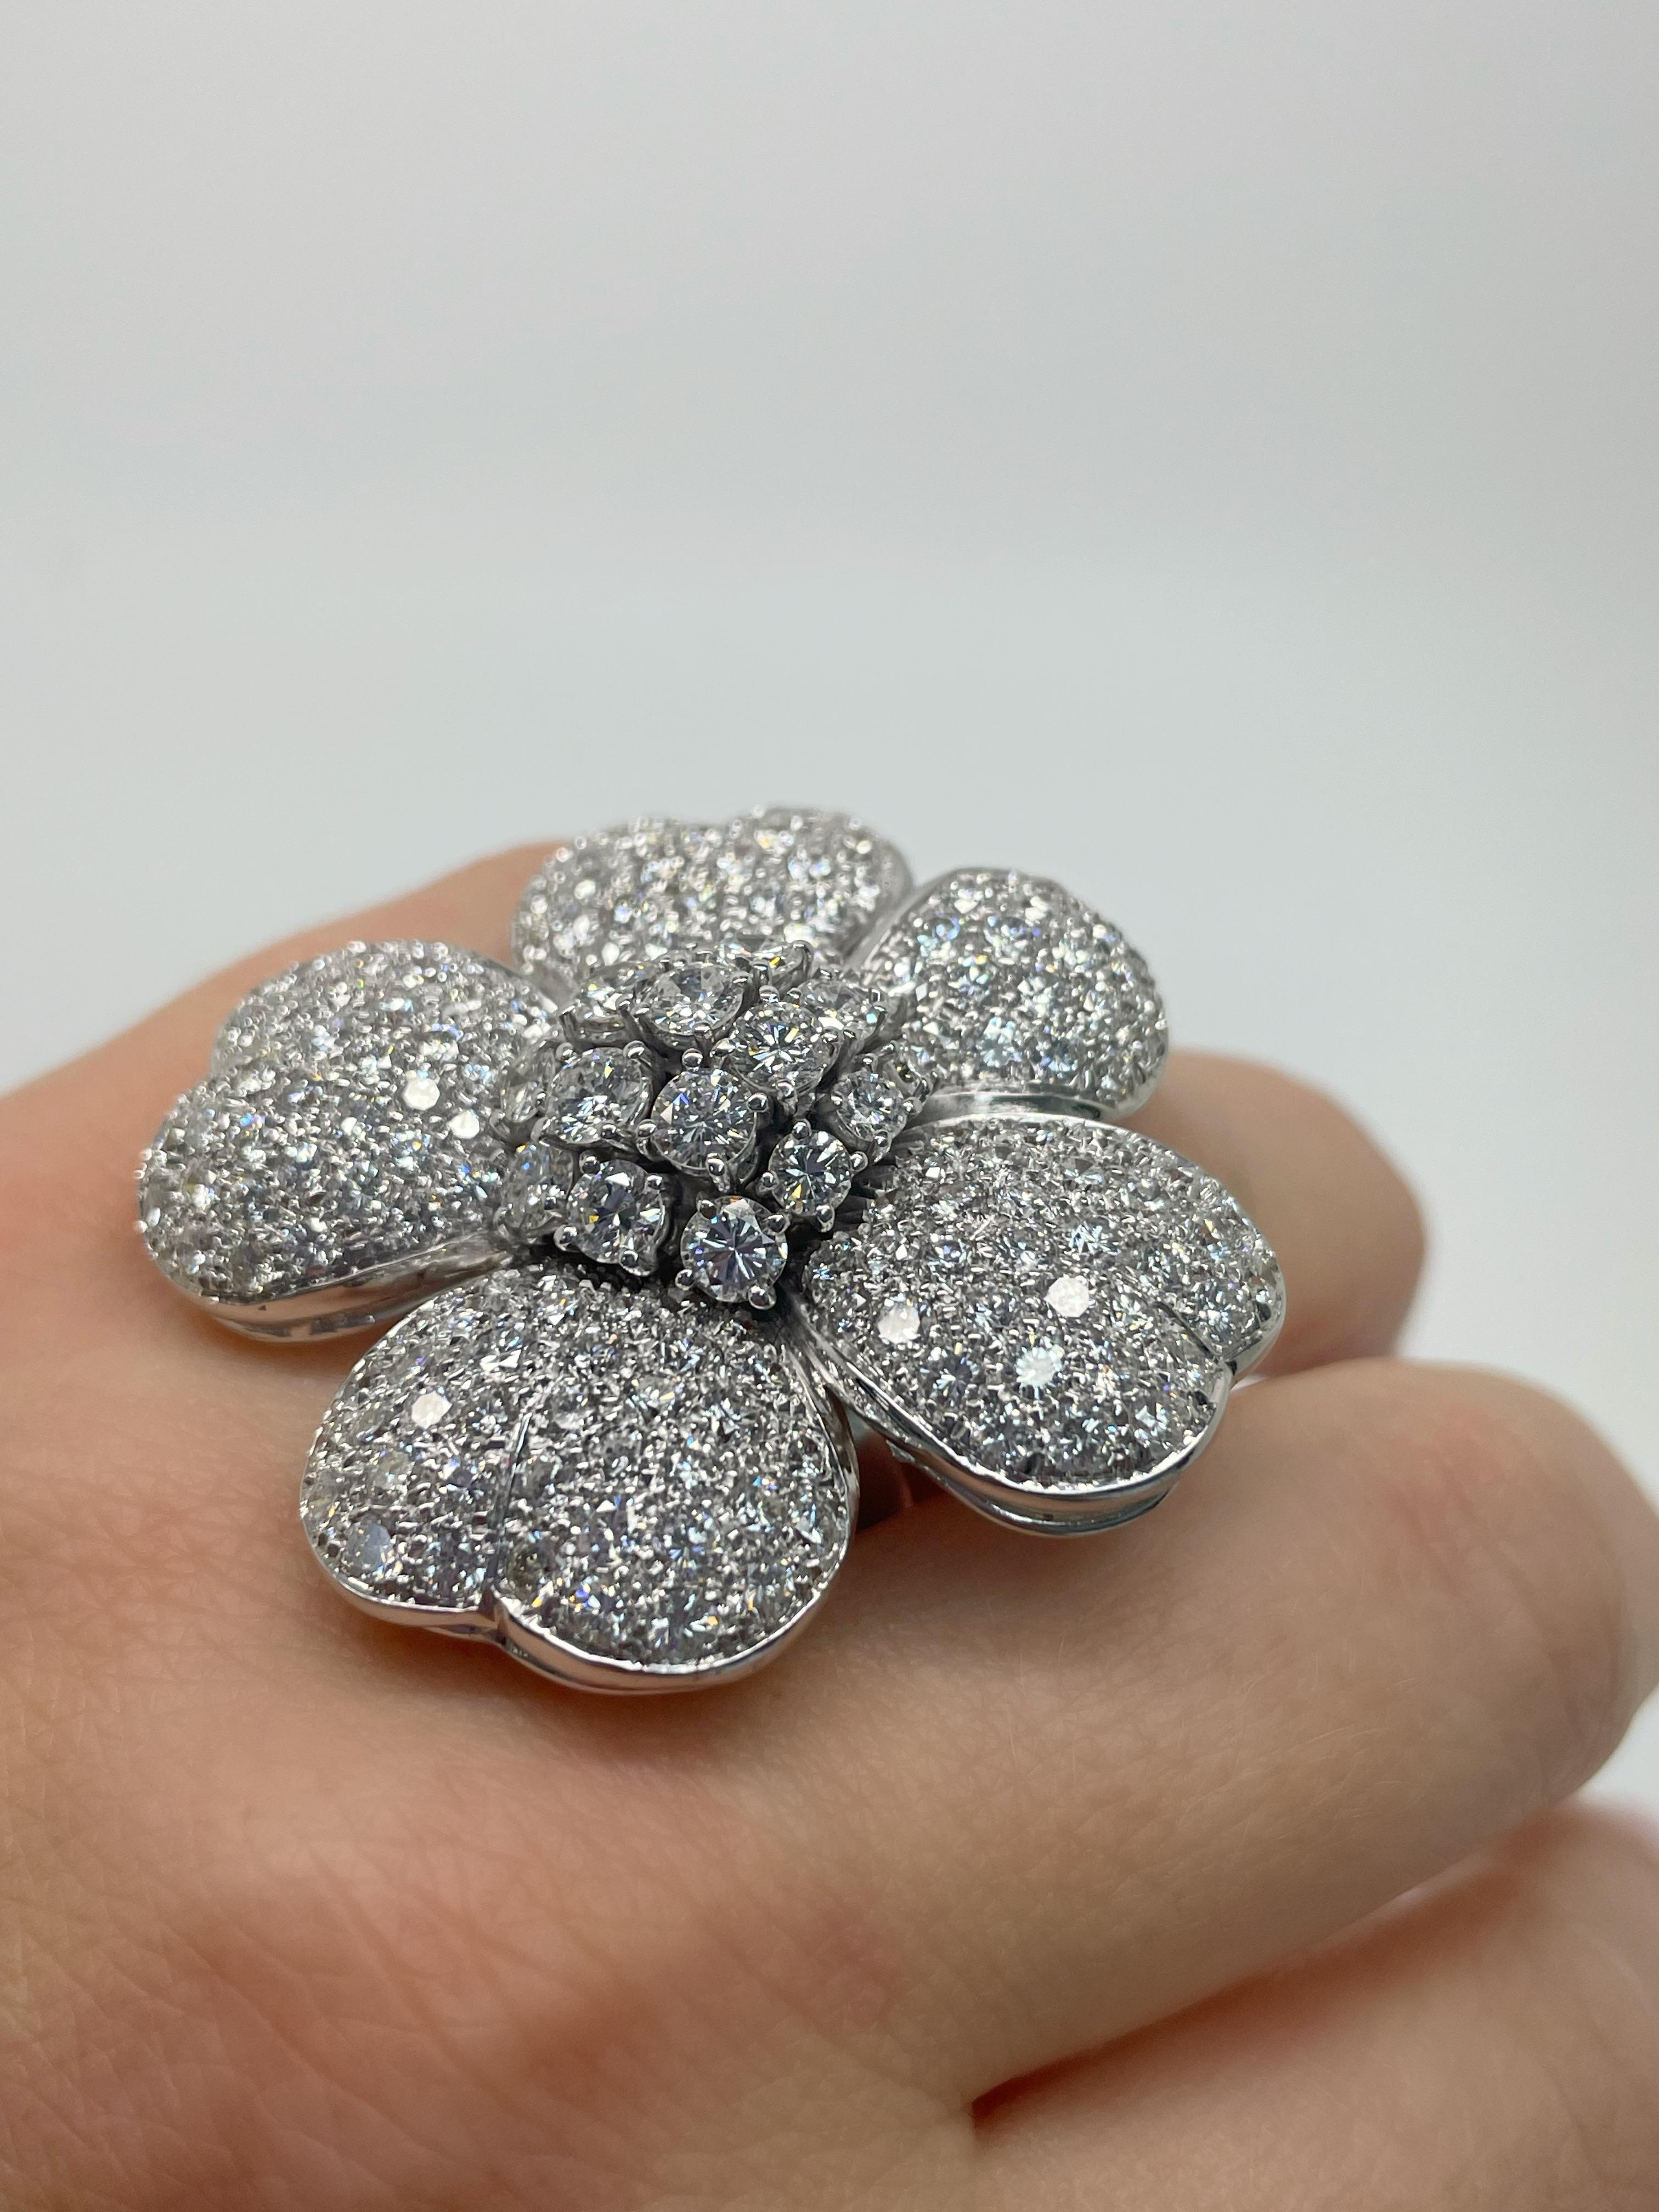 This fun flower ring contains top quality pave set round brilliant cut diamonds weighing approximately 13.00 carats total. Mounted in 18 karat white gold, this ring is the perfect whimsical touch for your collection. 

Stamp: 18K.
Ring Size: 6